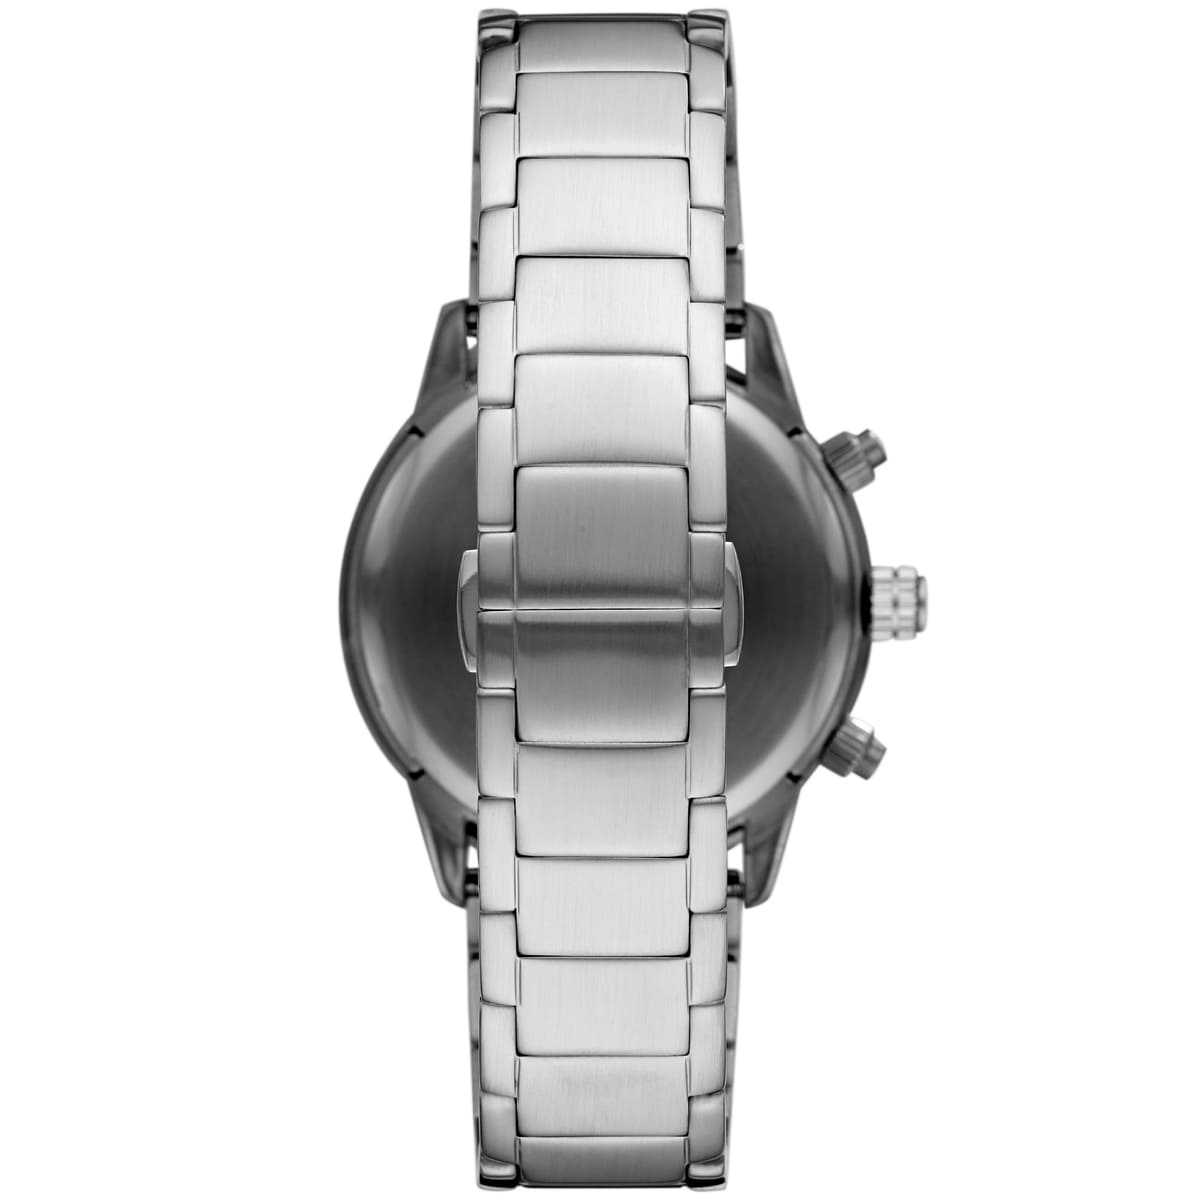 Black dial Men's Watch with stainless-steel silver strap